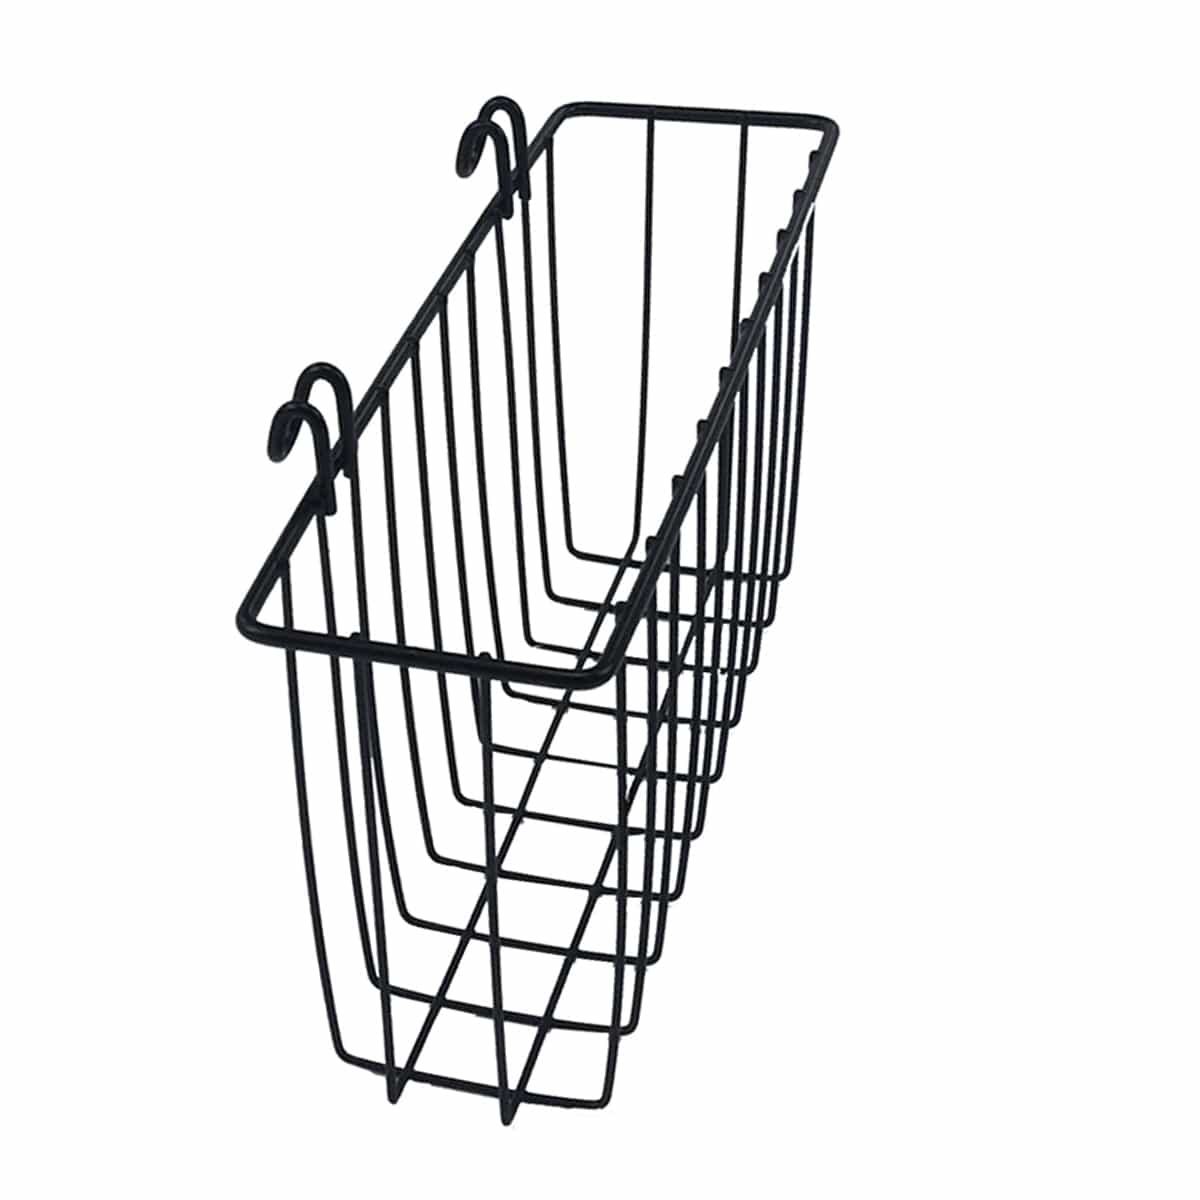 Small black hayrack for C&C guinea pig cages